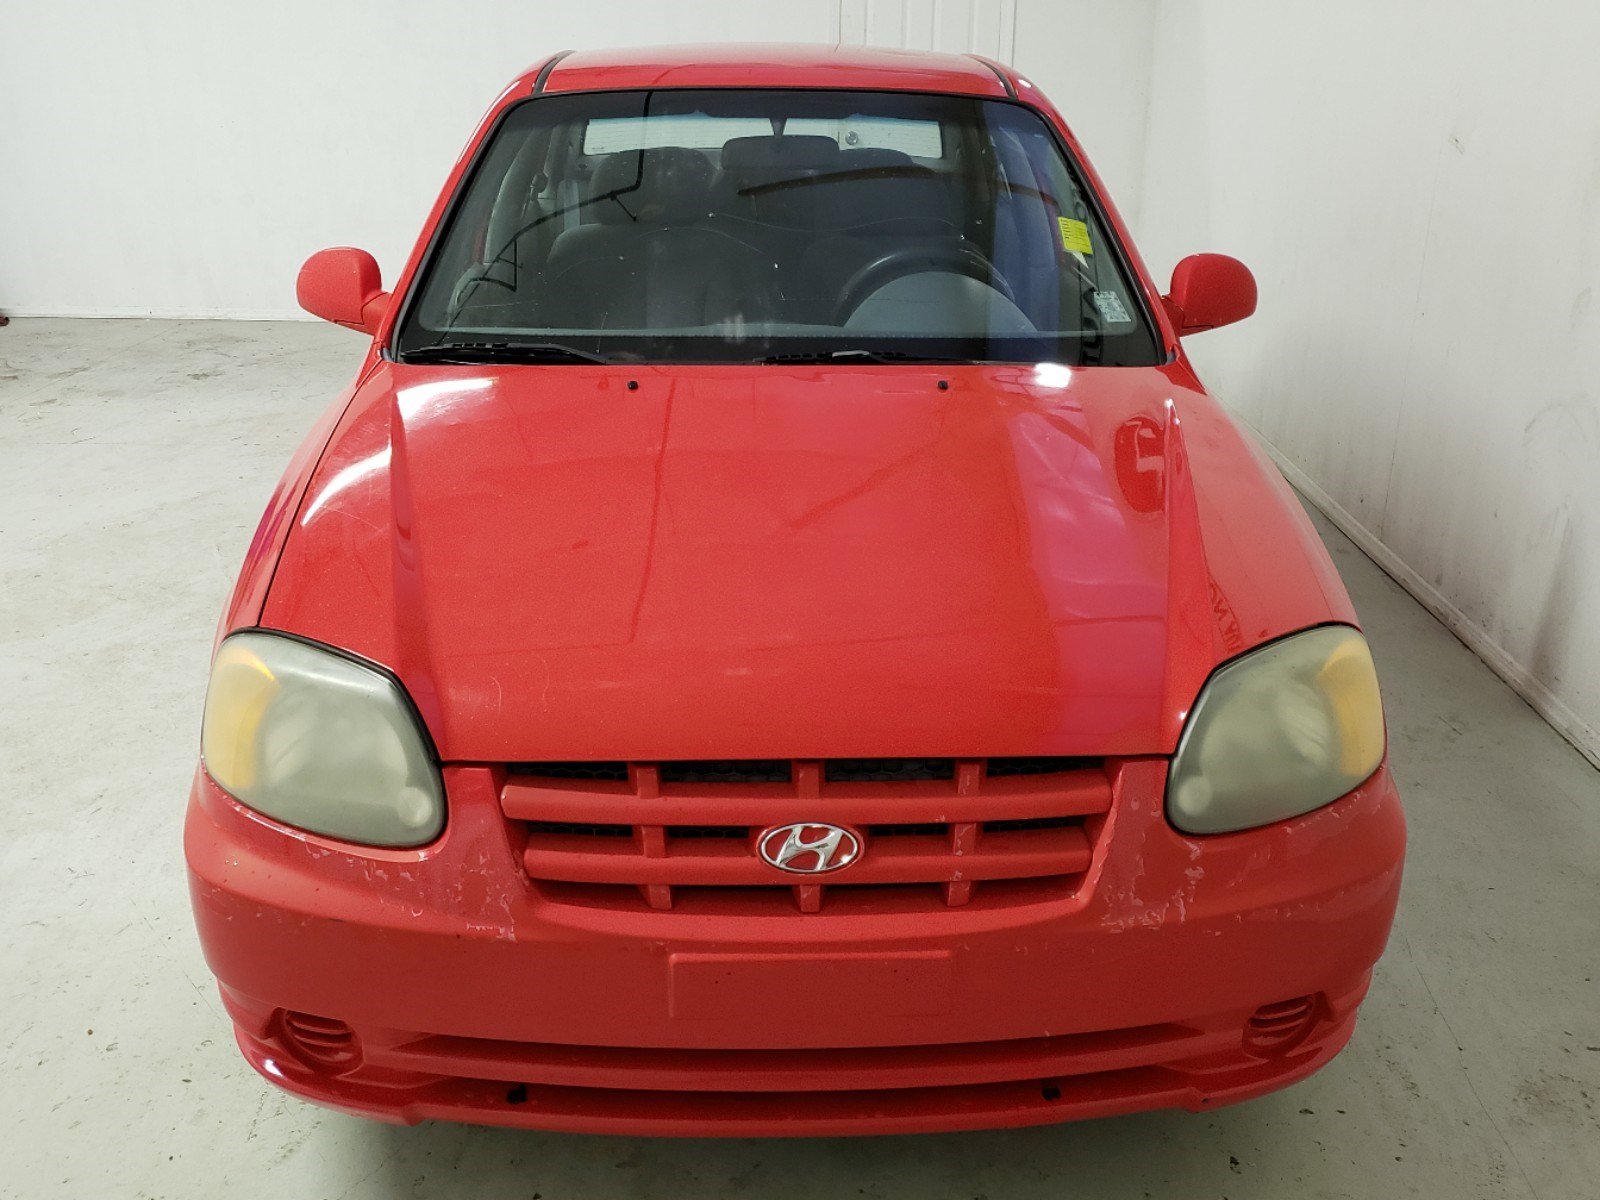 PreOwned 2005 Hyundai Accent GLS 4dr Car in Jackson, MS